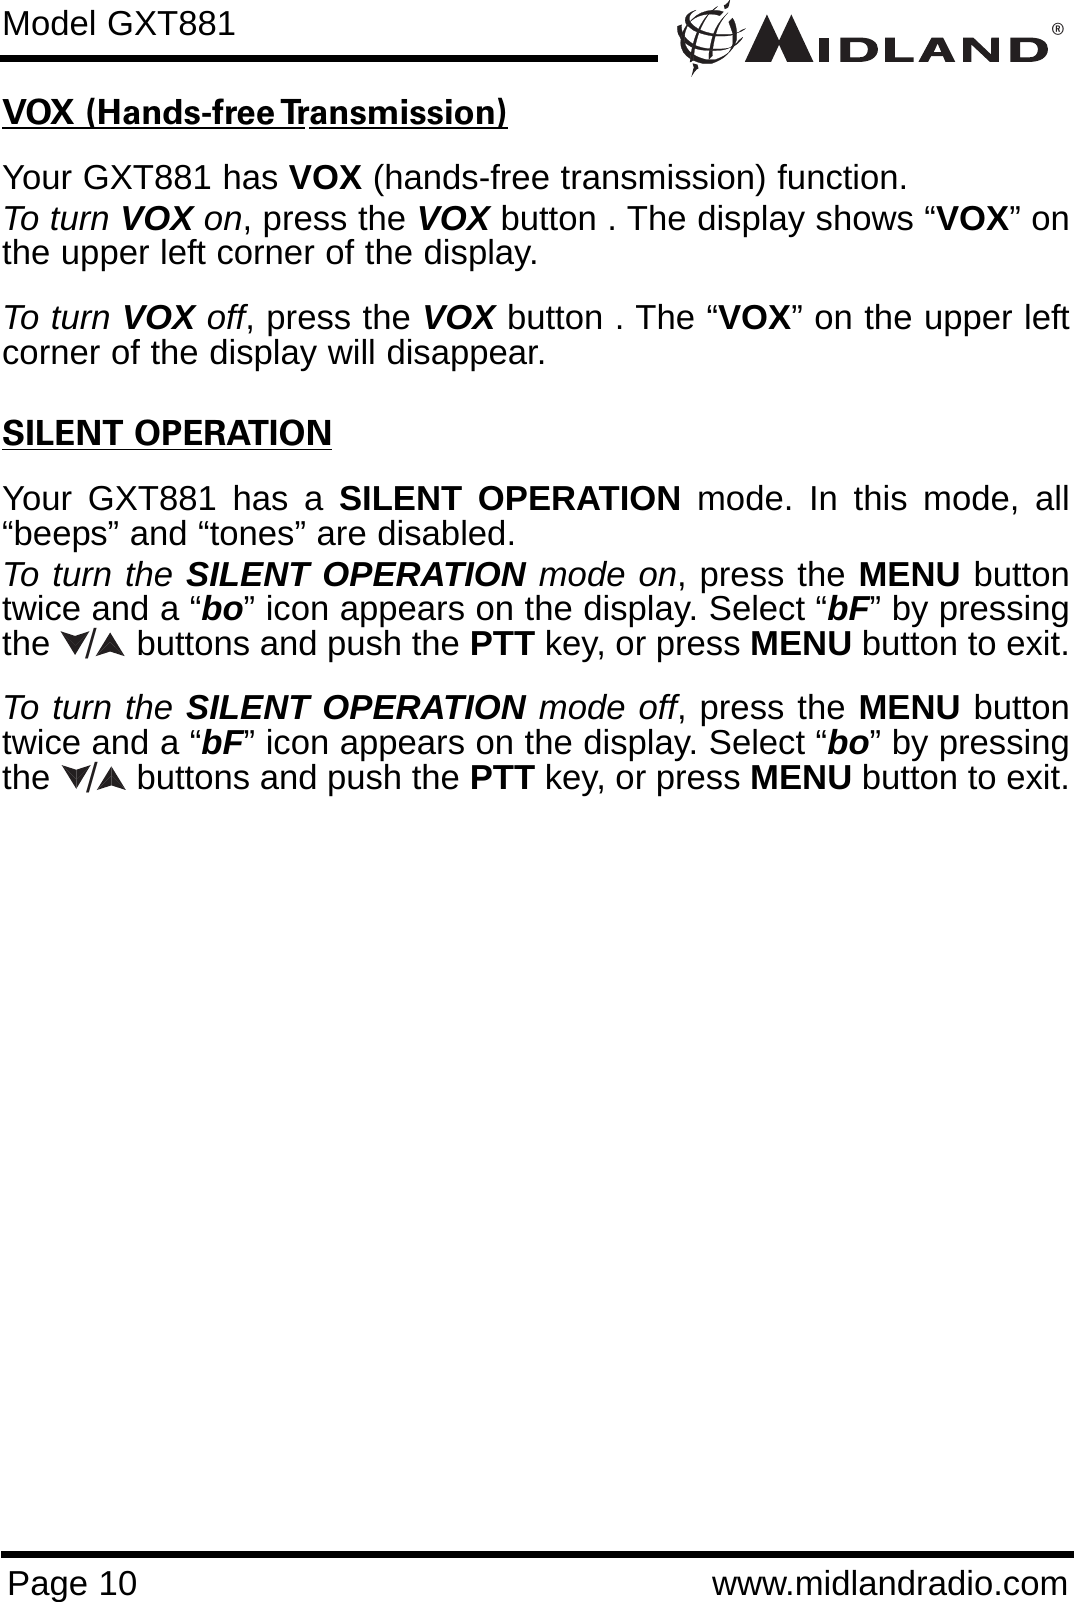 ®Page 10 www.midlandradio.comVOX (Hands-free Transmission)Your GXT881 has VOX (hands-free transmission) function.To turn VOX on, press the VOX button . The display shows “VOX” onthe upper left corner of the display.   To turn VOX off, press the VOX button . The “VOX” on the upper leftcorner of the display will disappear.SILENT OPERATIONYour GXT881 has a SILENT OPERATION mode. In this mode, all“beeps” and “tones” are disabled. To turn the SILENT OPERATION mode on, press the MENU buttontwice and a “bo” icon appears on the display. Select “bF” by pressingthe         buttons and push the PTT key, or press MENU button to exit. To turn the SILENT OPERATION mode off, press the MENU buttontwice and a “bF” icon appears on the display. Select “bo” by pressingthe         buttons and push the PTT key, or press MENU button to exit.Model GXT881//